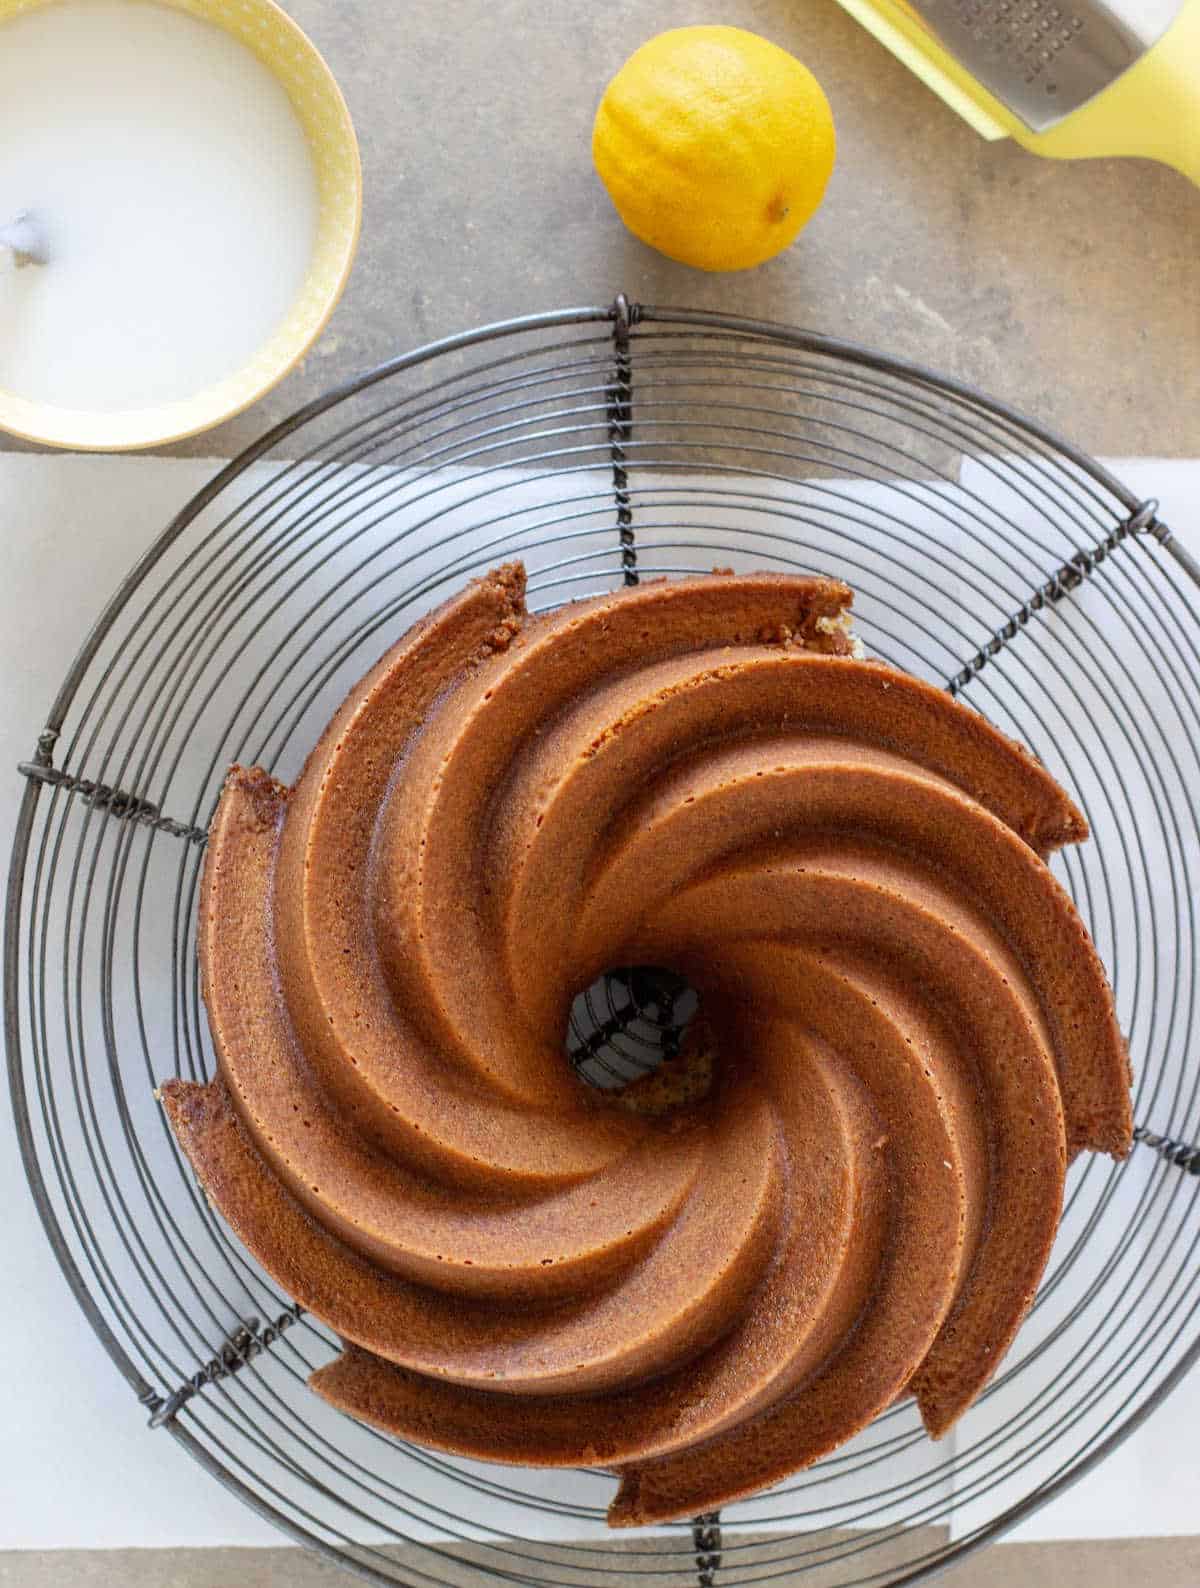 Wire rack and parchment paper with bundt cake, bowl with glaze, a lemon and grater. Grayish surface.